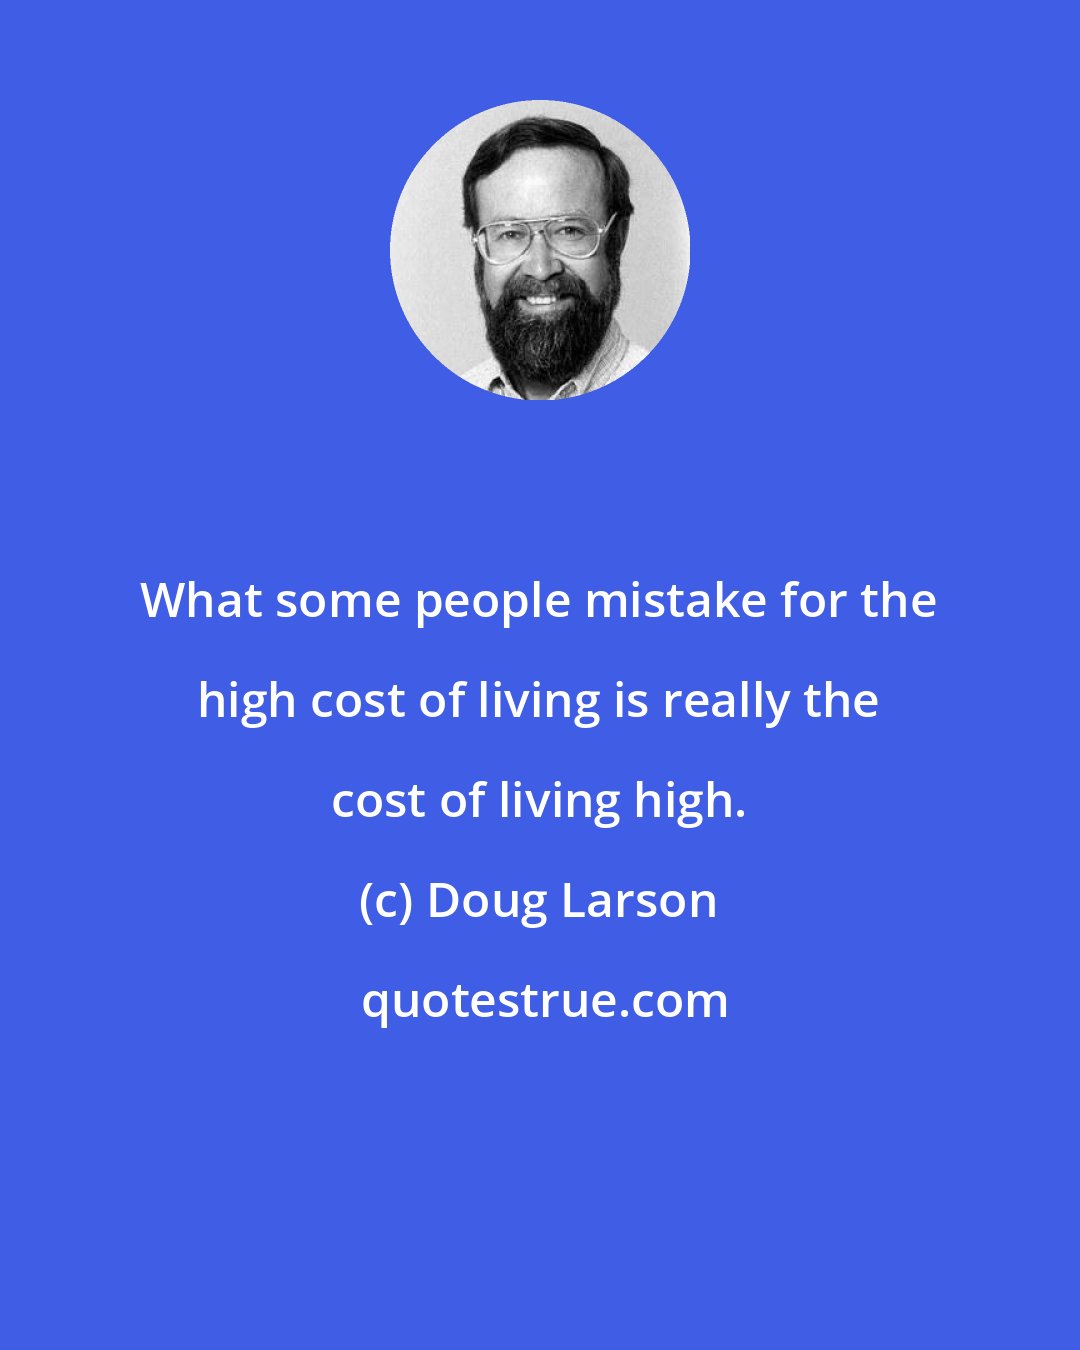 Doug Larson: What some people mistake for the high cost of living is really the cost of living high.